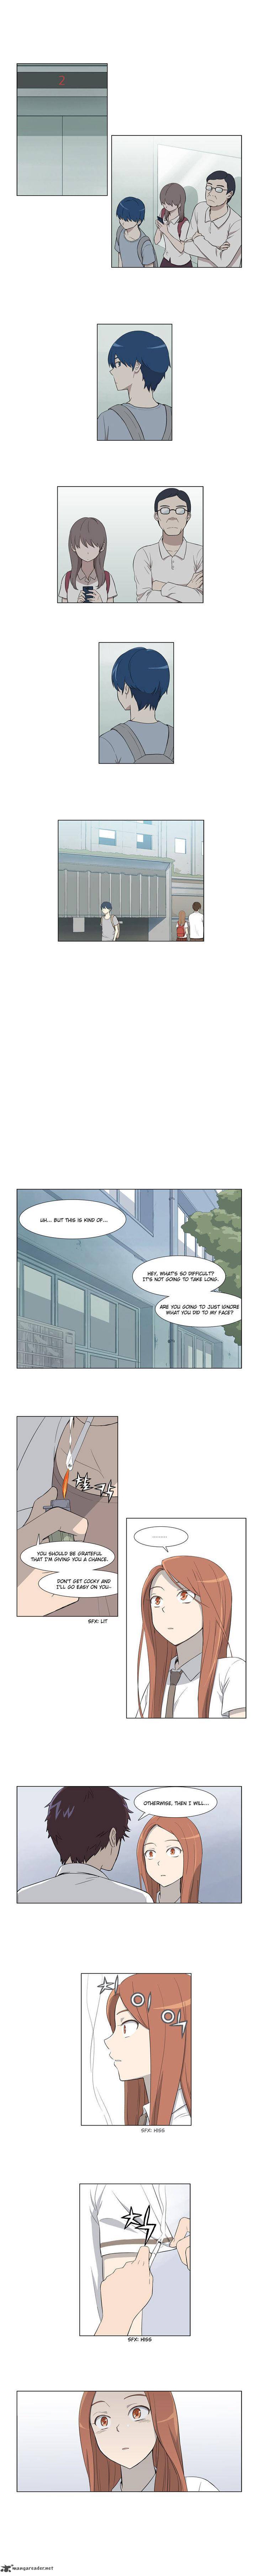 Gaussian Blur Chapter 10 Page 3